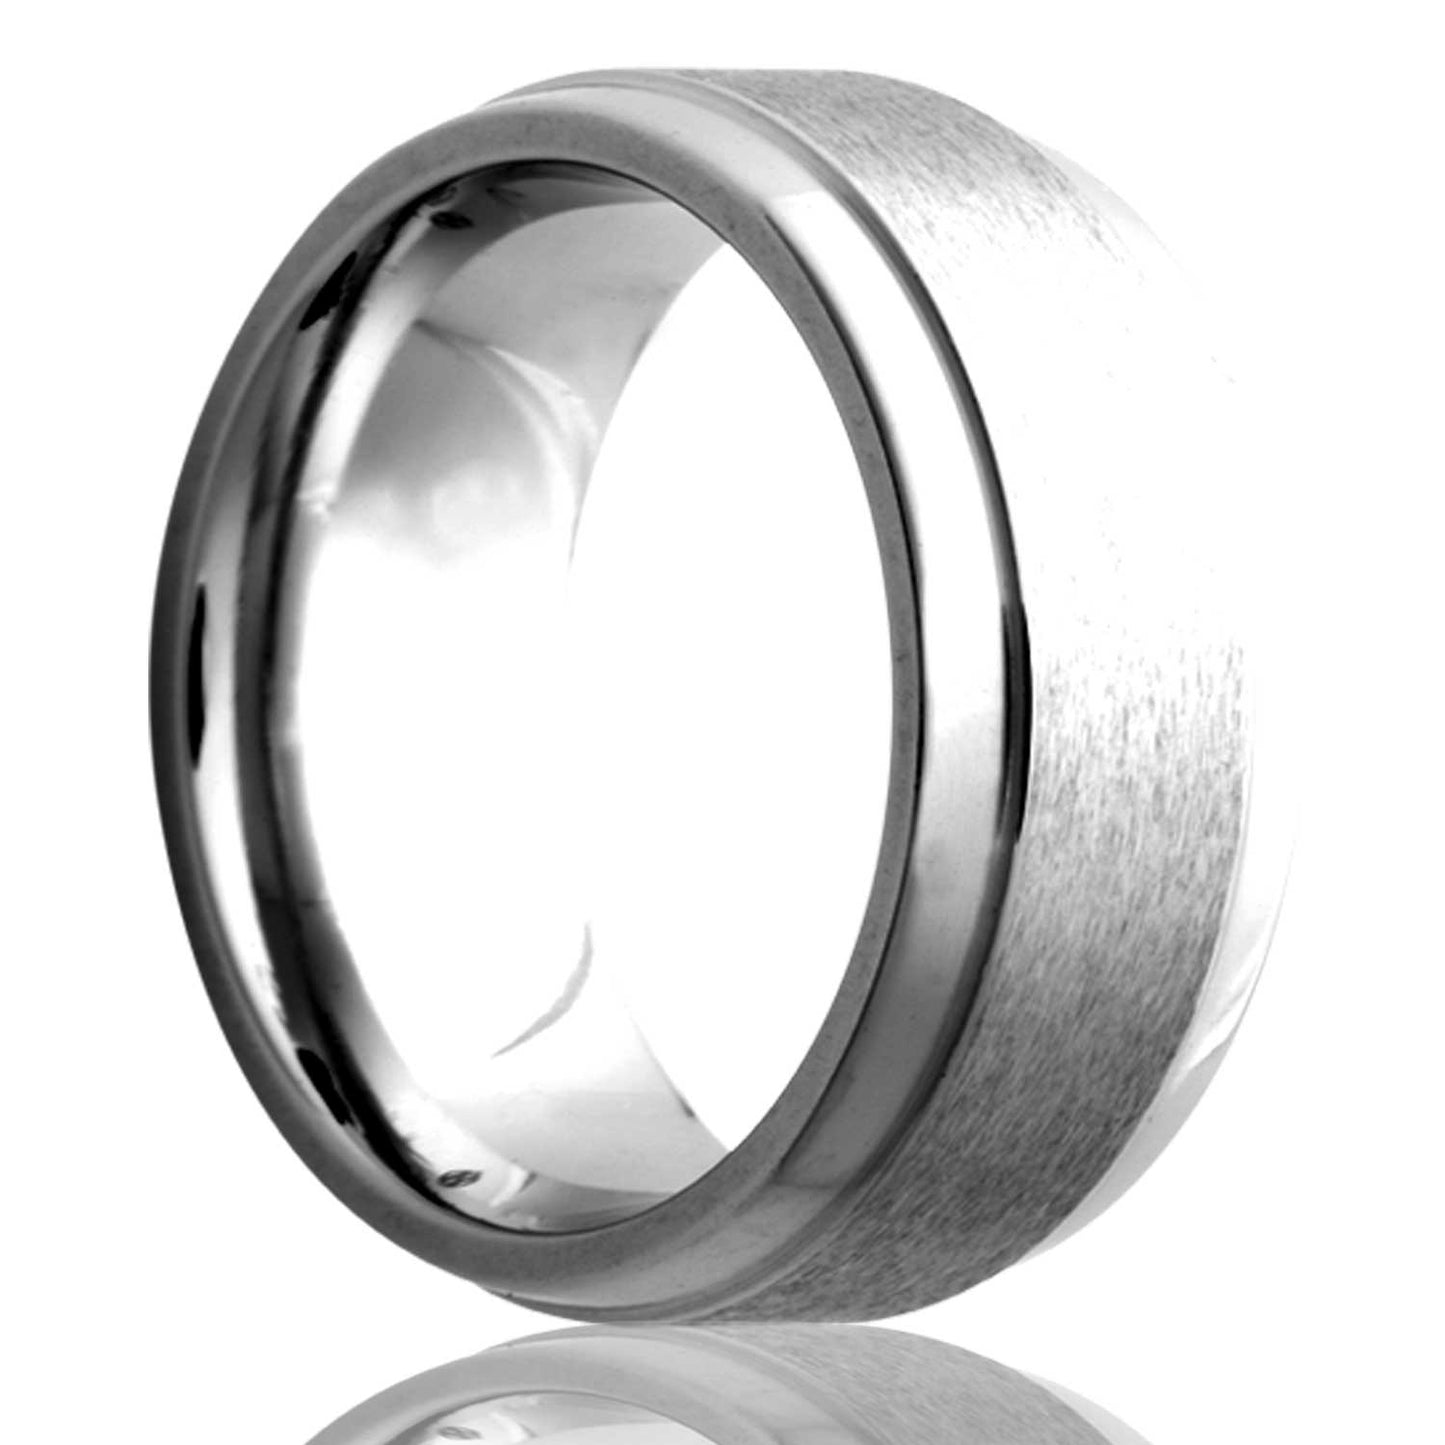 A satin finish cobalt wedding band displayed on a neutral white background.